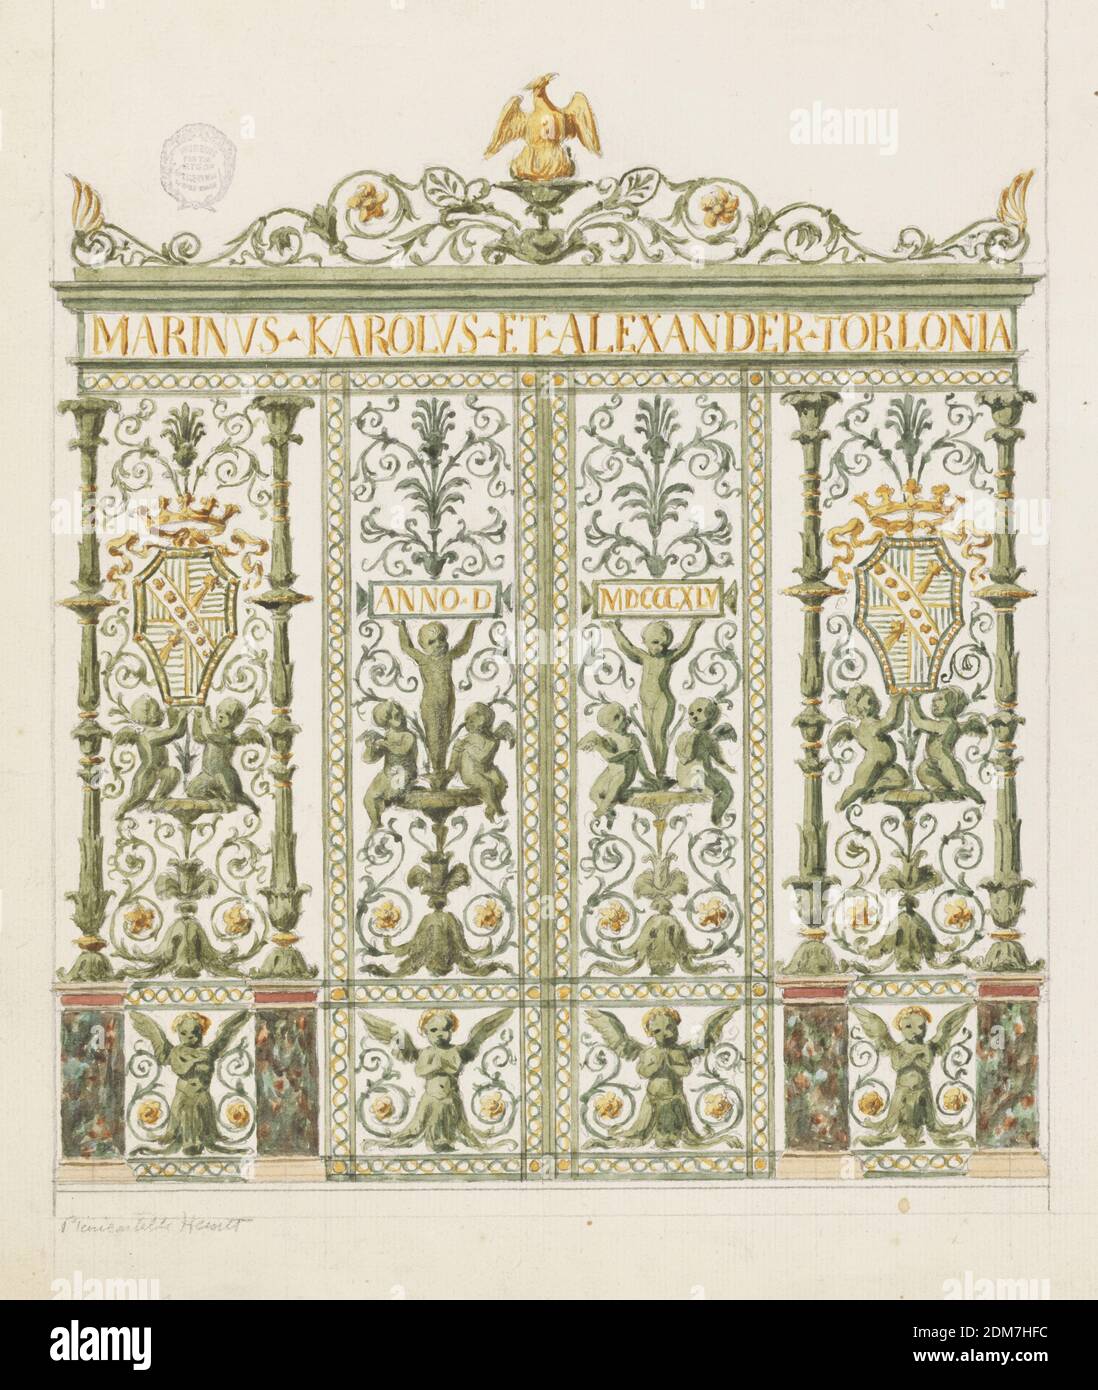 Design for a Sacristy Gate of a Chapel of the Torlonia Family, Brush and watercolor, graphite on paper, Design for a gate of a chapel of the Torlonia family, intended to be executed in metal, probably for the chapel in St. Giovanni in Laterno, Italy. A folding door between a lateral panel on either side. In the latter stand two columns in the shape of candelabra upon marble pedestals, supporting at front a band with two entwined ribbons as it frames the panels of the leaves and connects the bases and cornices of the pedestals, and then the entablature. In the frieze is the inscription: MARINVS Stock Photo